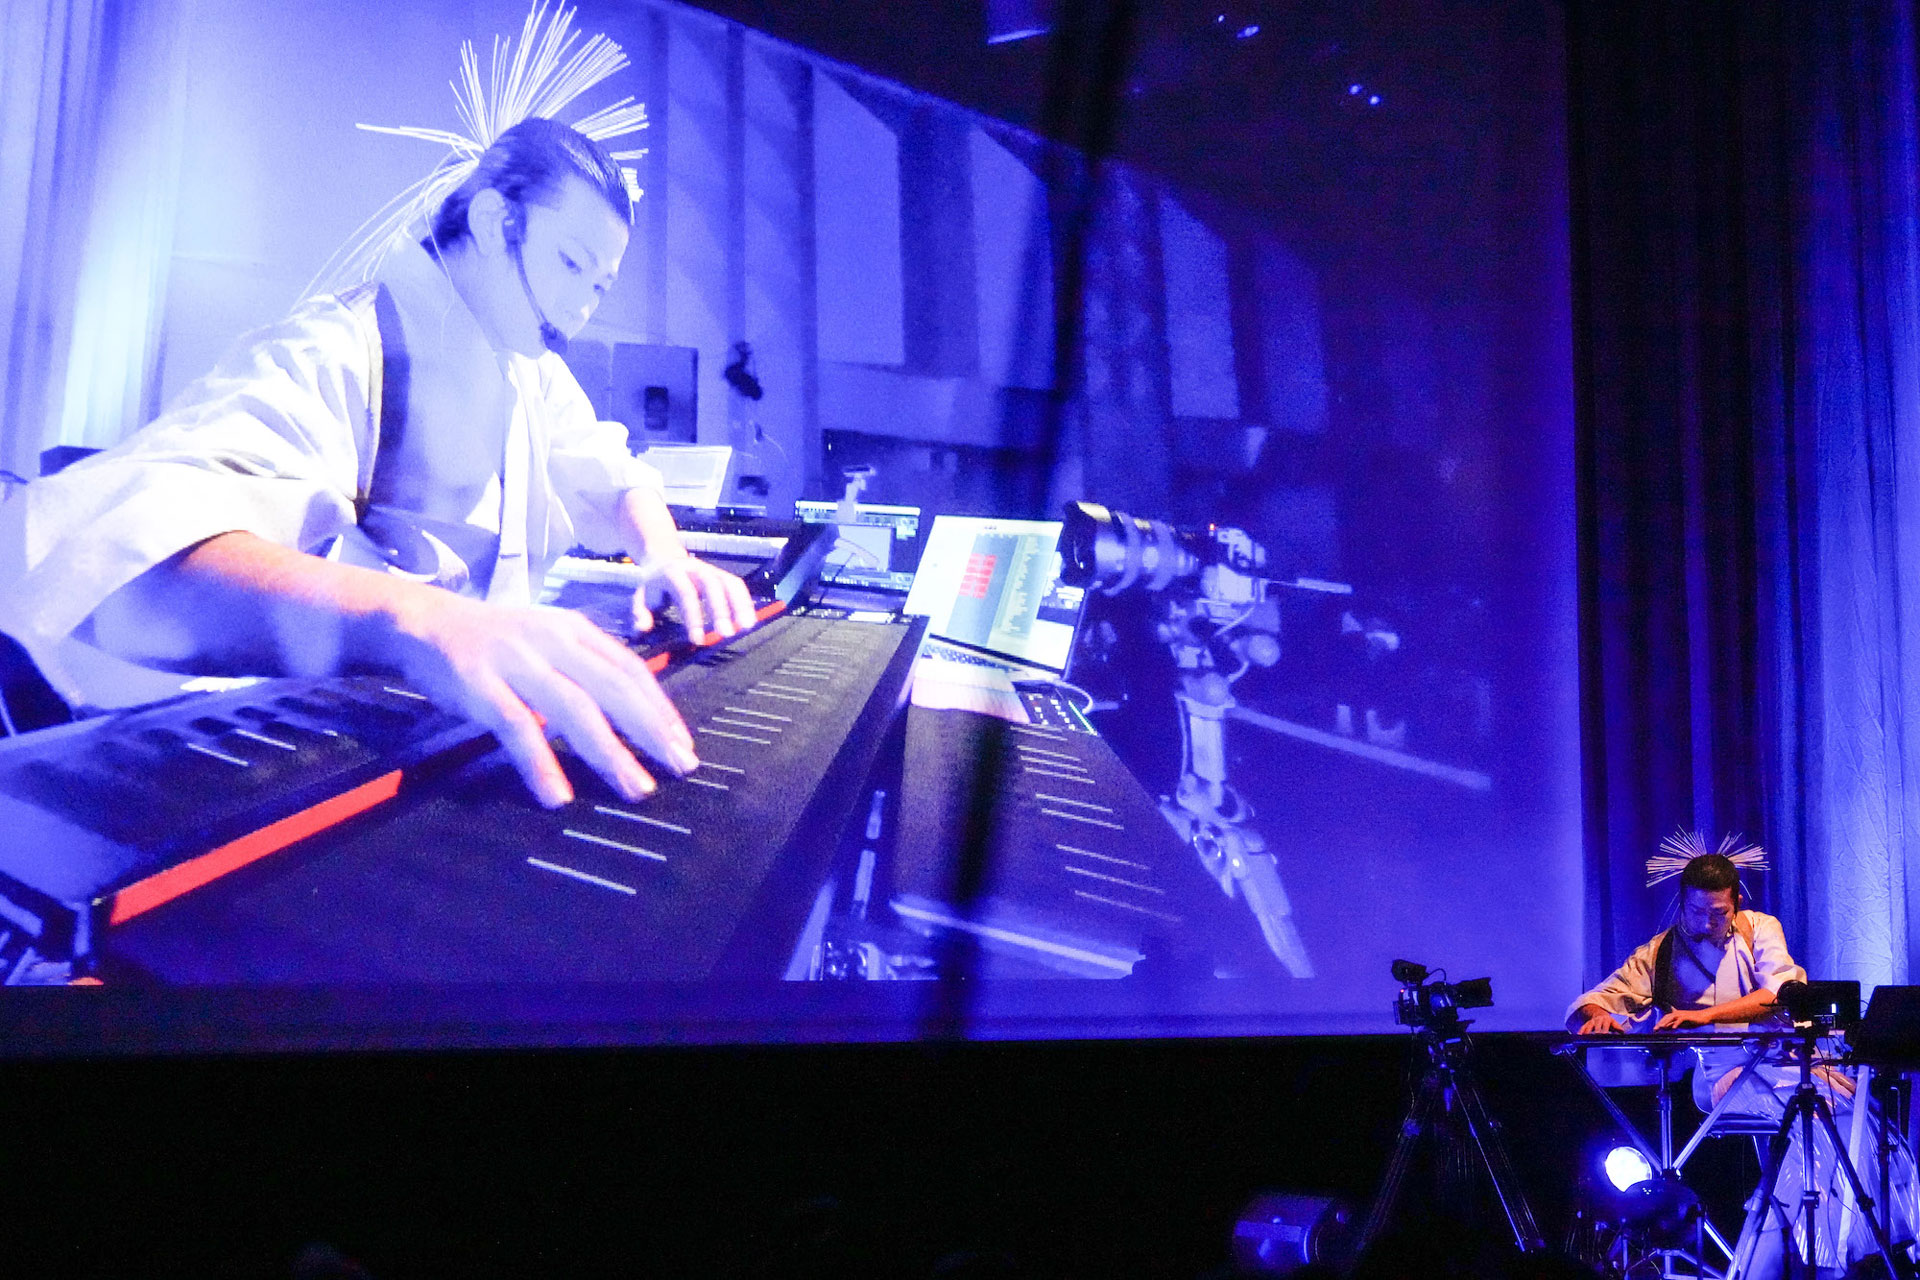 LIT Talent Awards - Performance On The Cutting-Edge Electronic Instruments